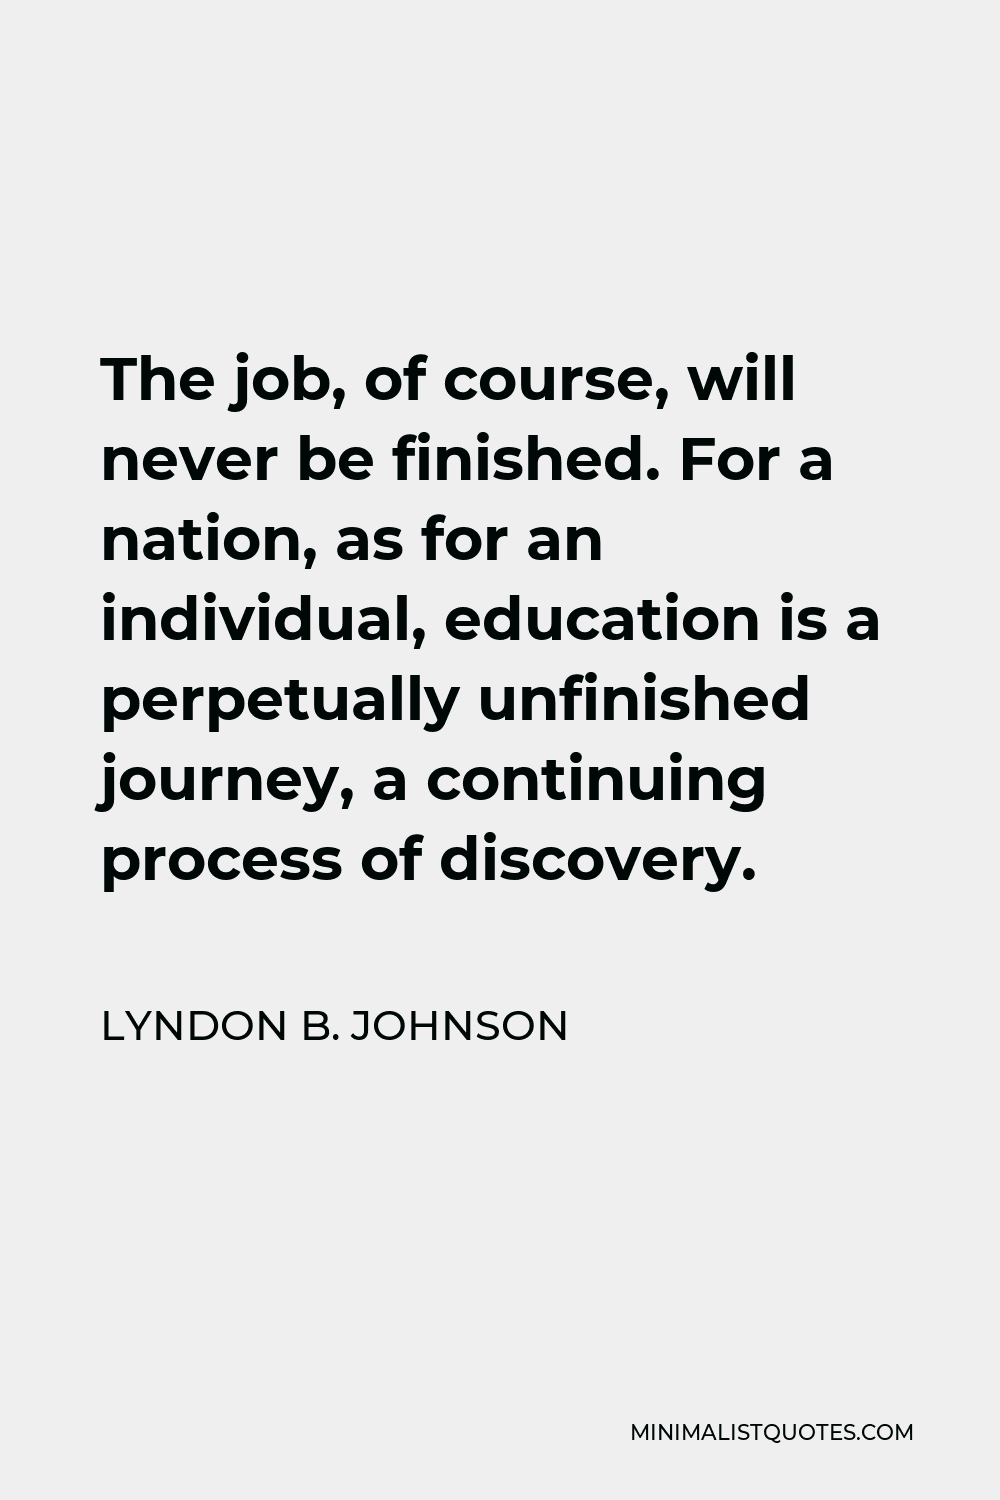 Lyndon B. Johnson Quote - The job, of course, will never be finished. For a nation, as for an individual, education is a perpetually unfinished journey, a continuing process of discovery.